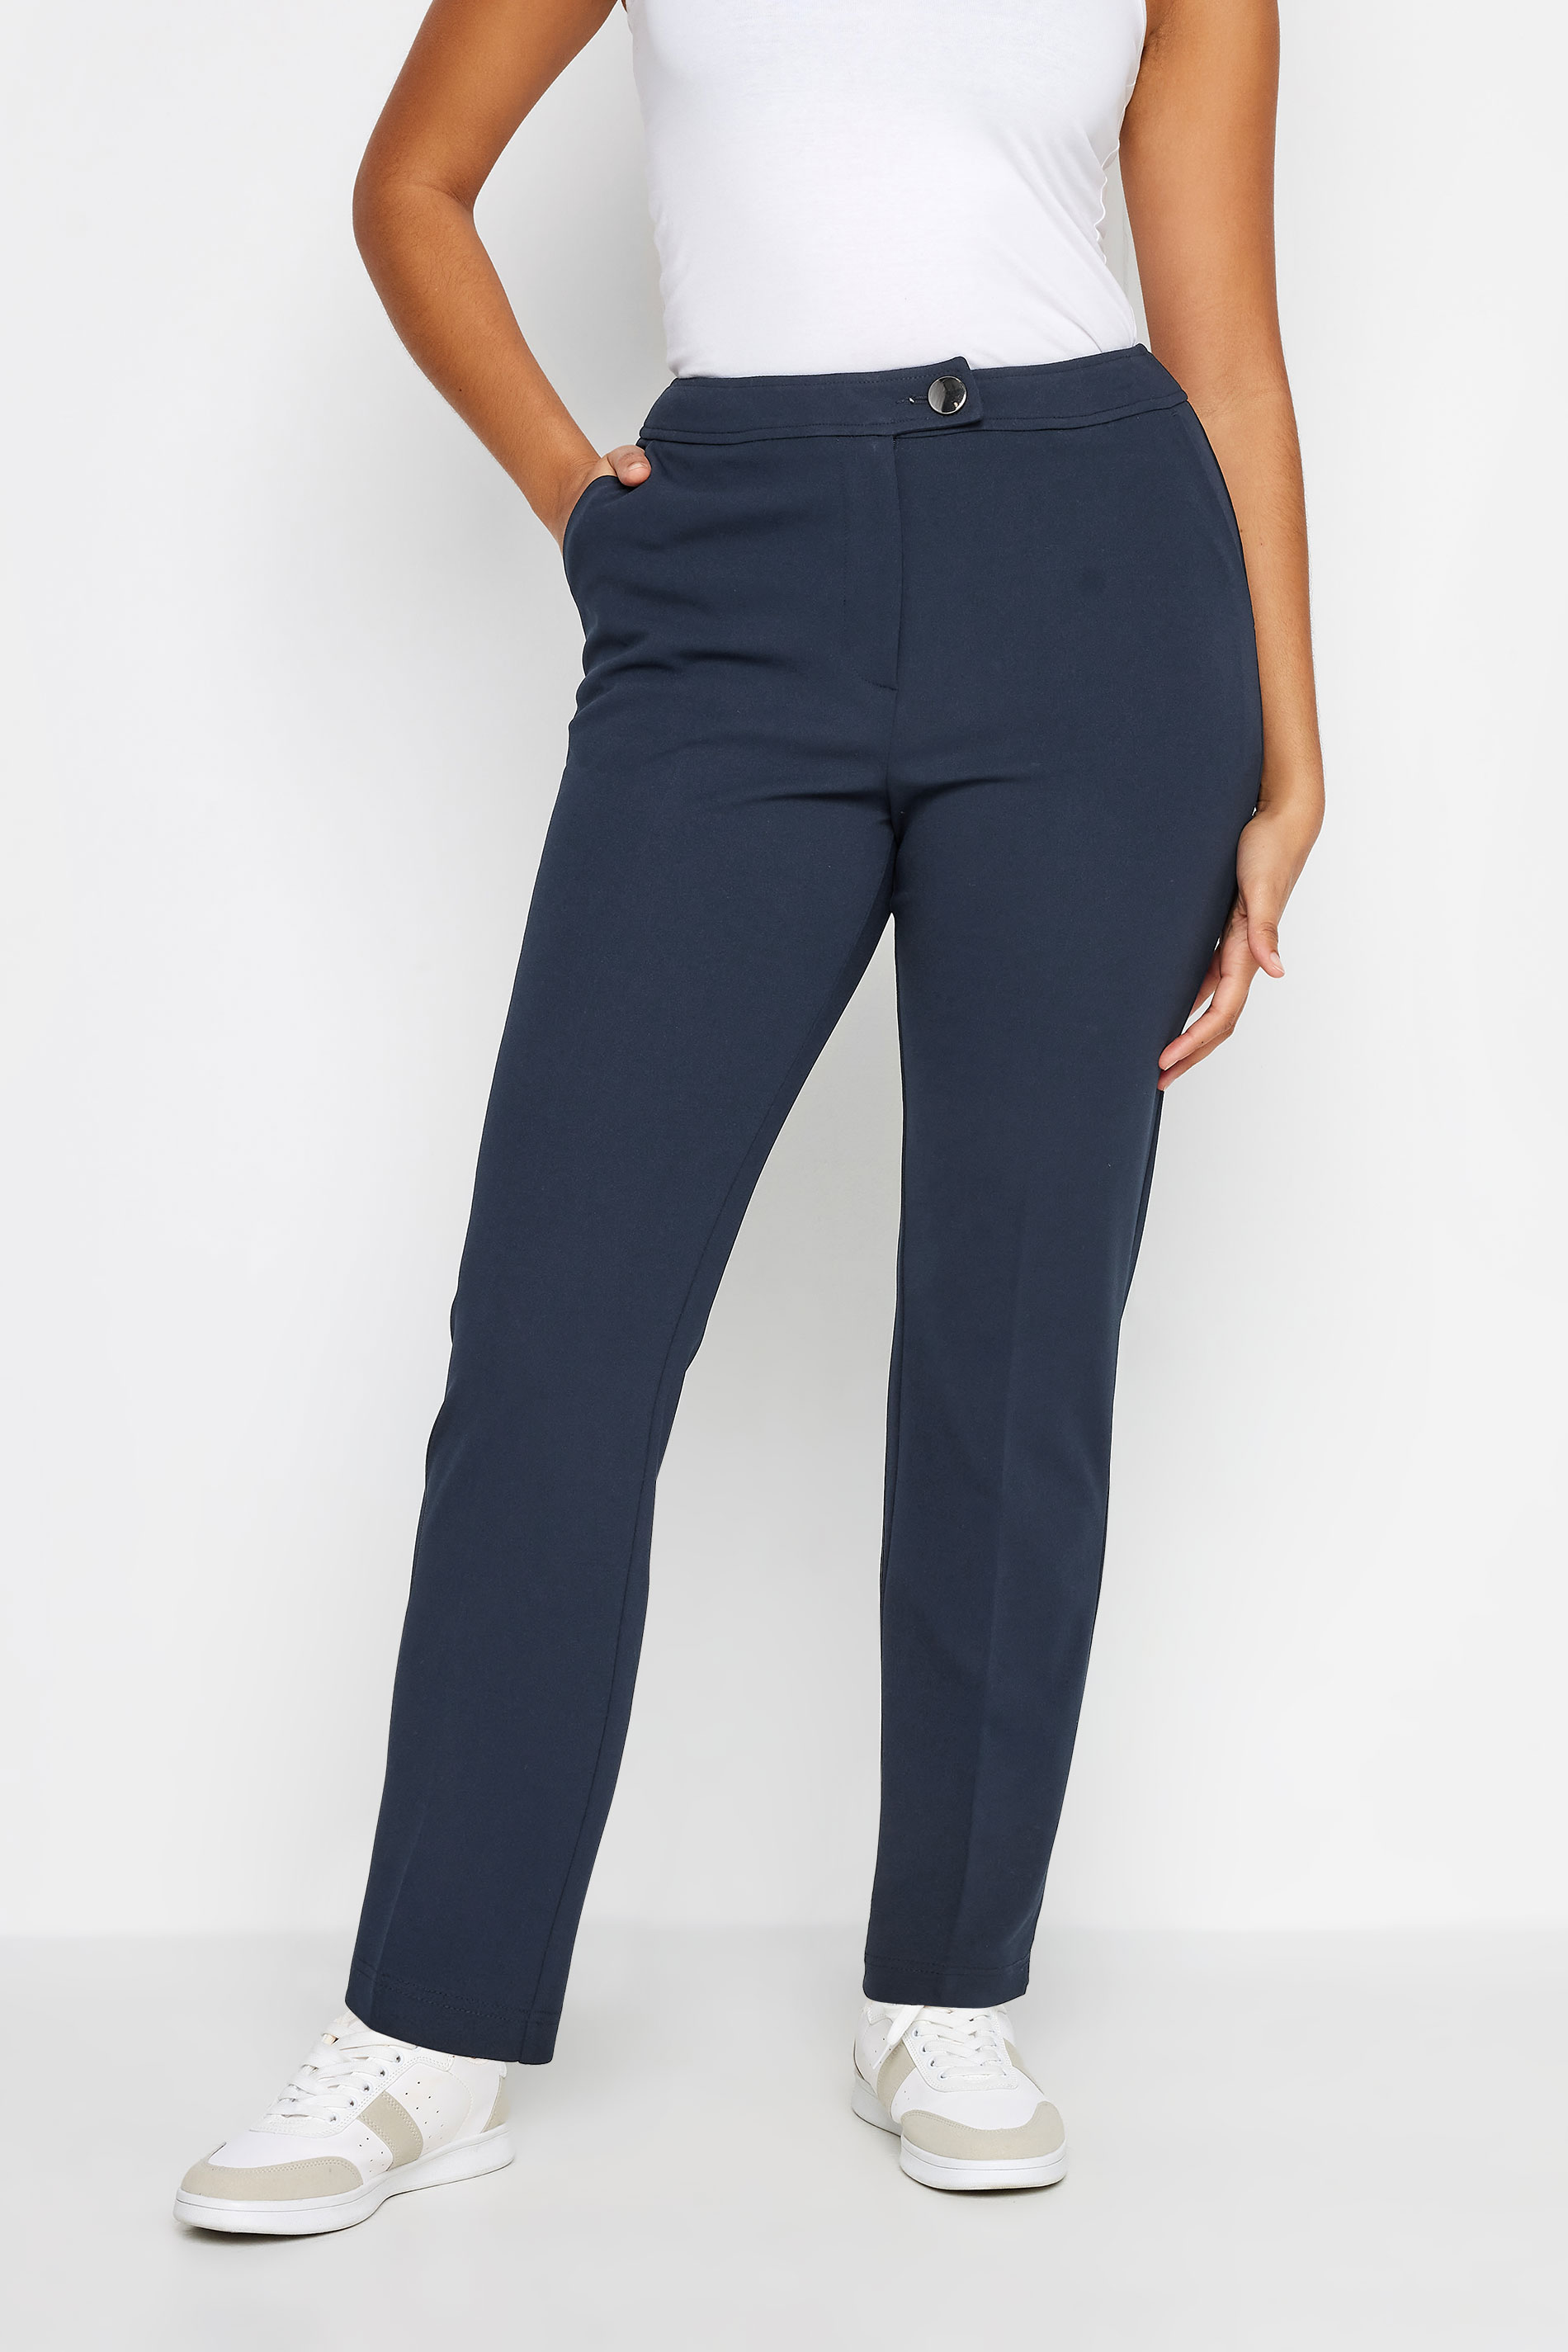 M&Co Navy Blue Tapered Tailored Trousers | M&Co 1